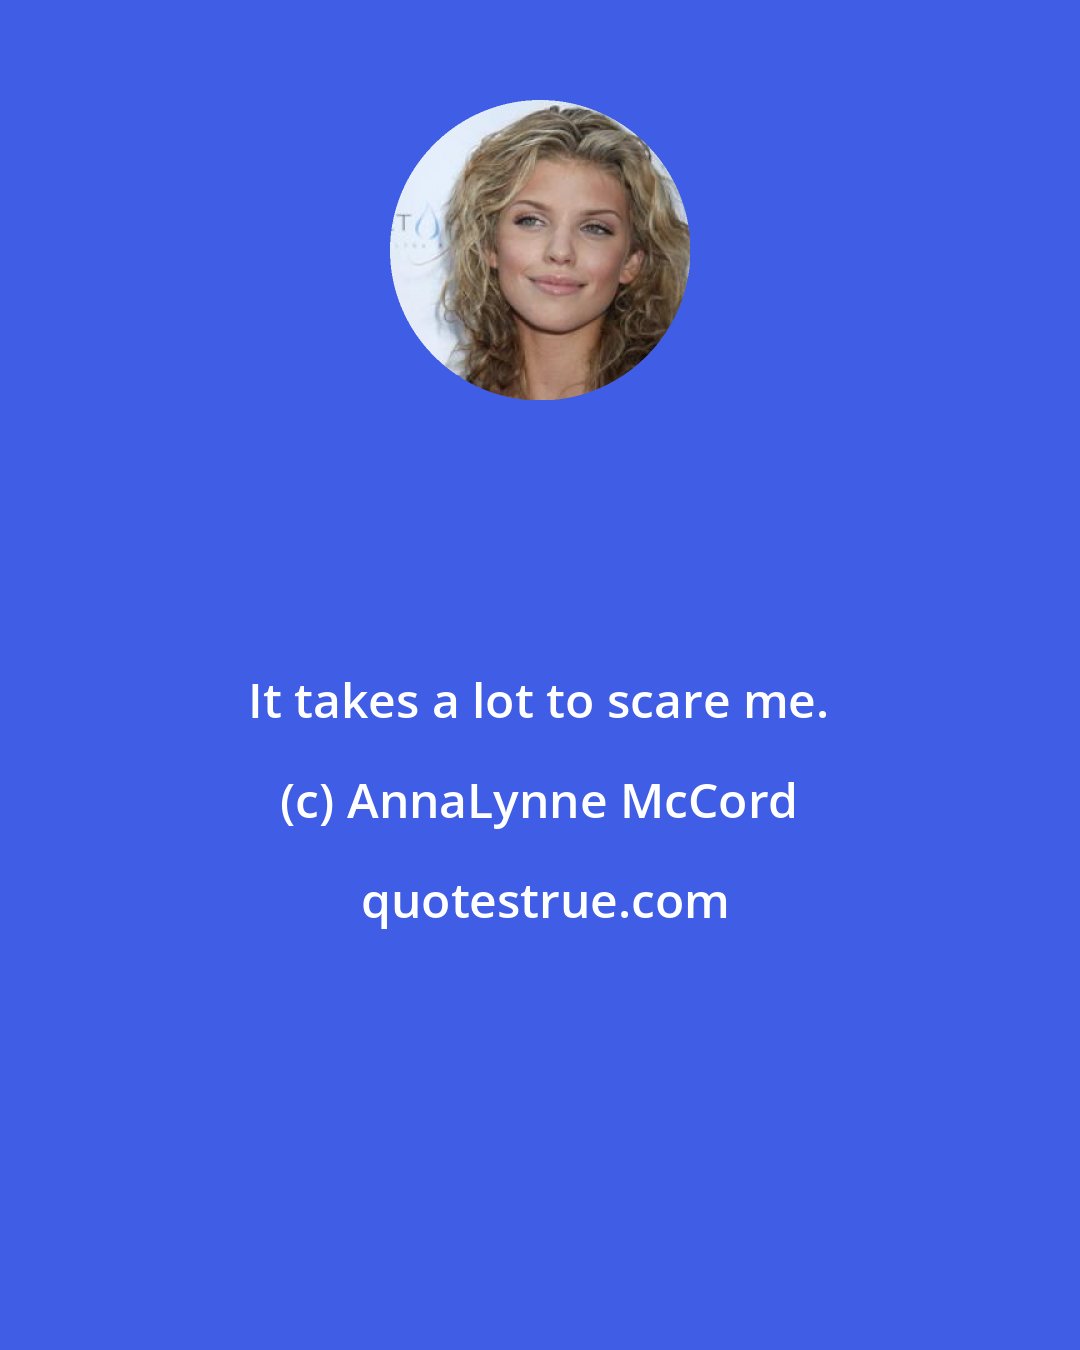 AnnaLynne McCord: It takes a lot to scare me.